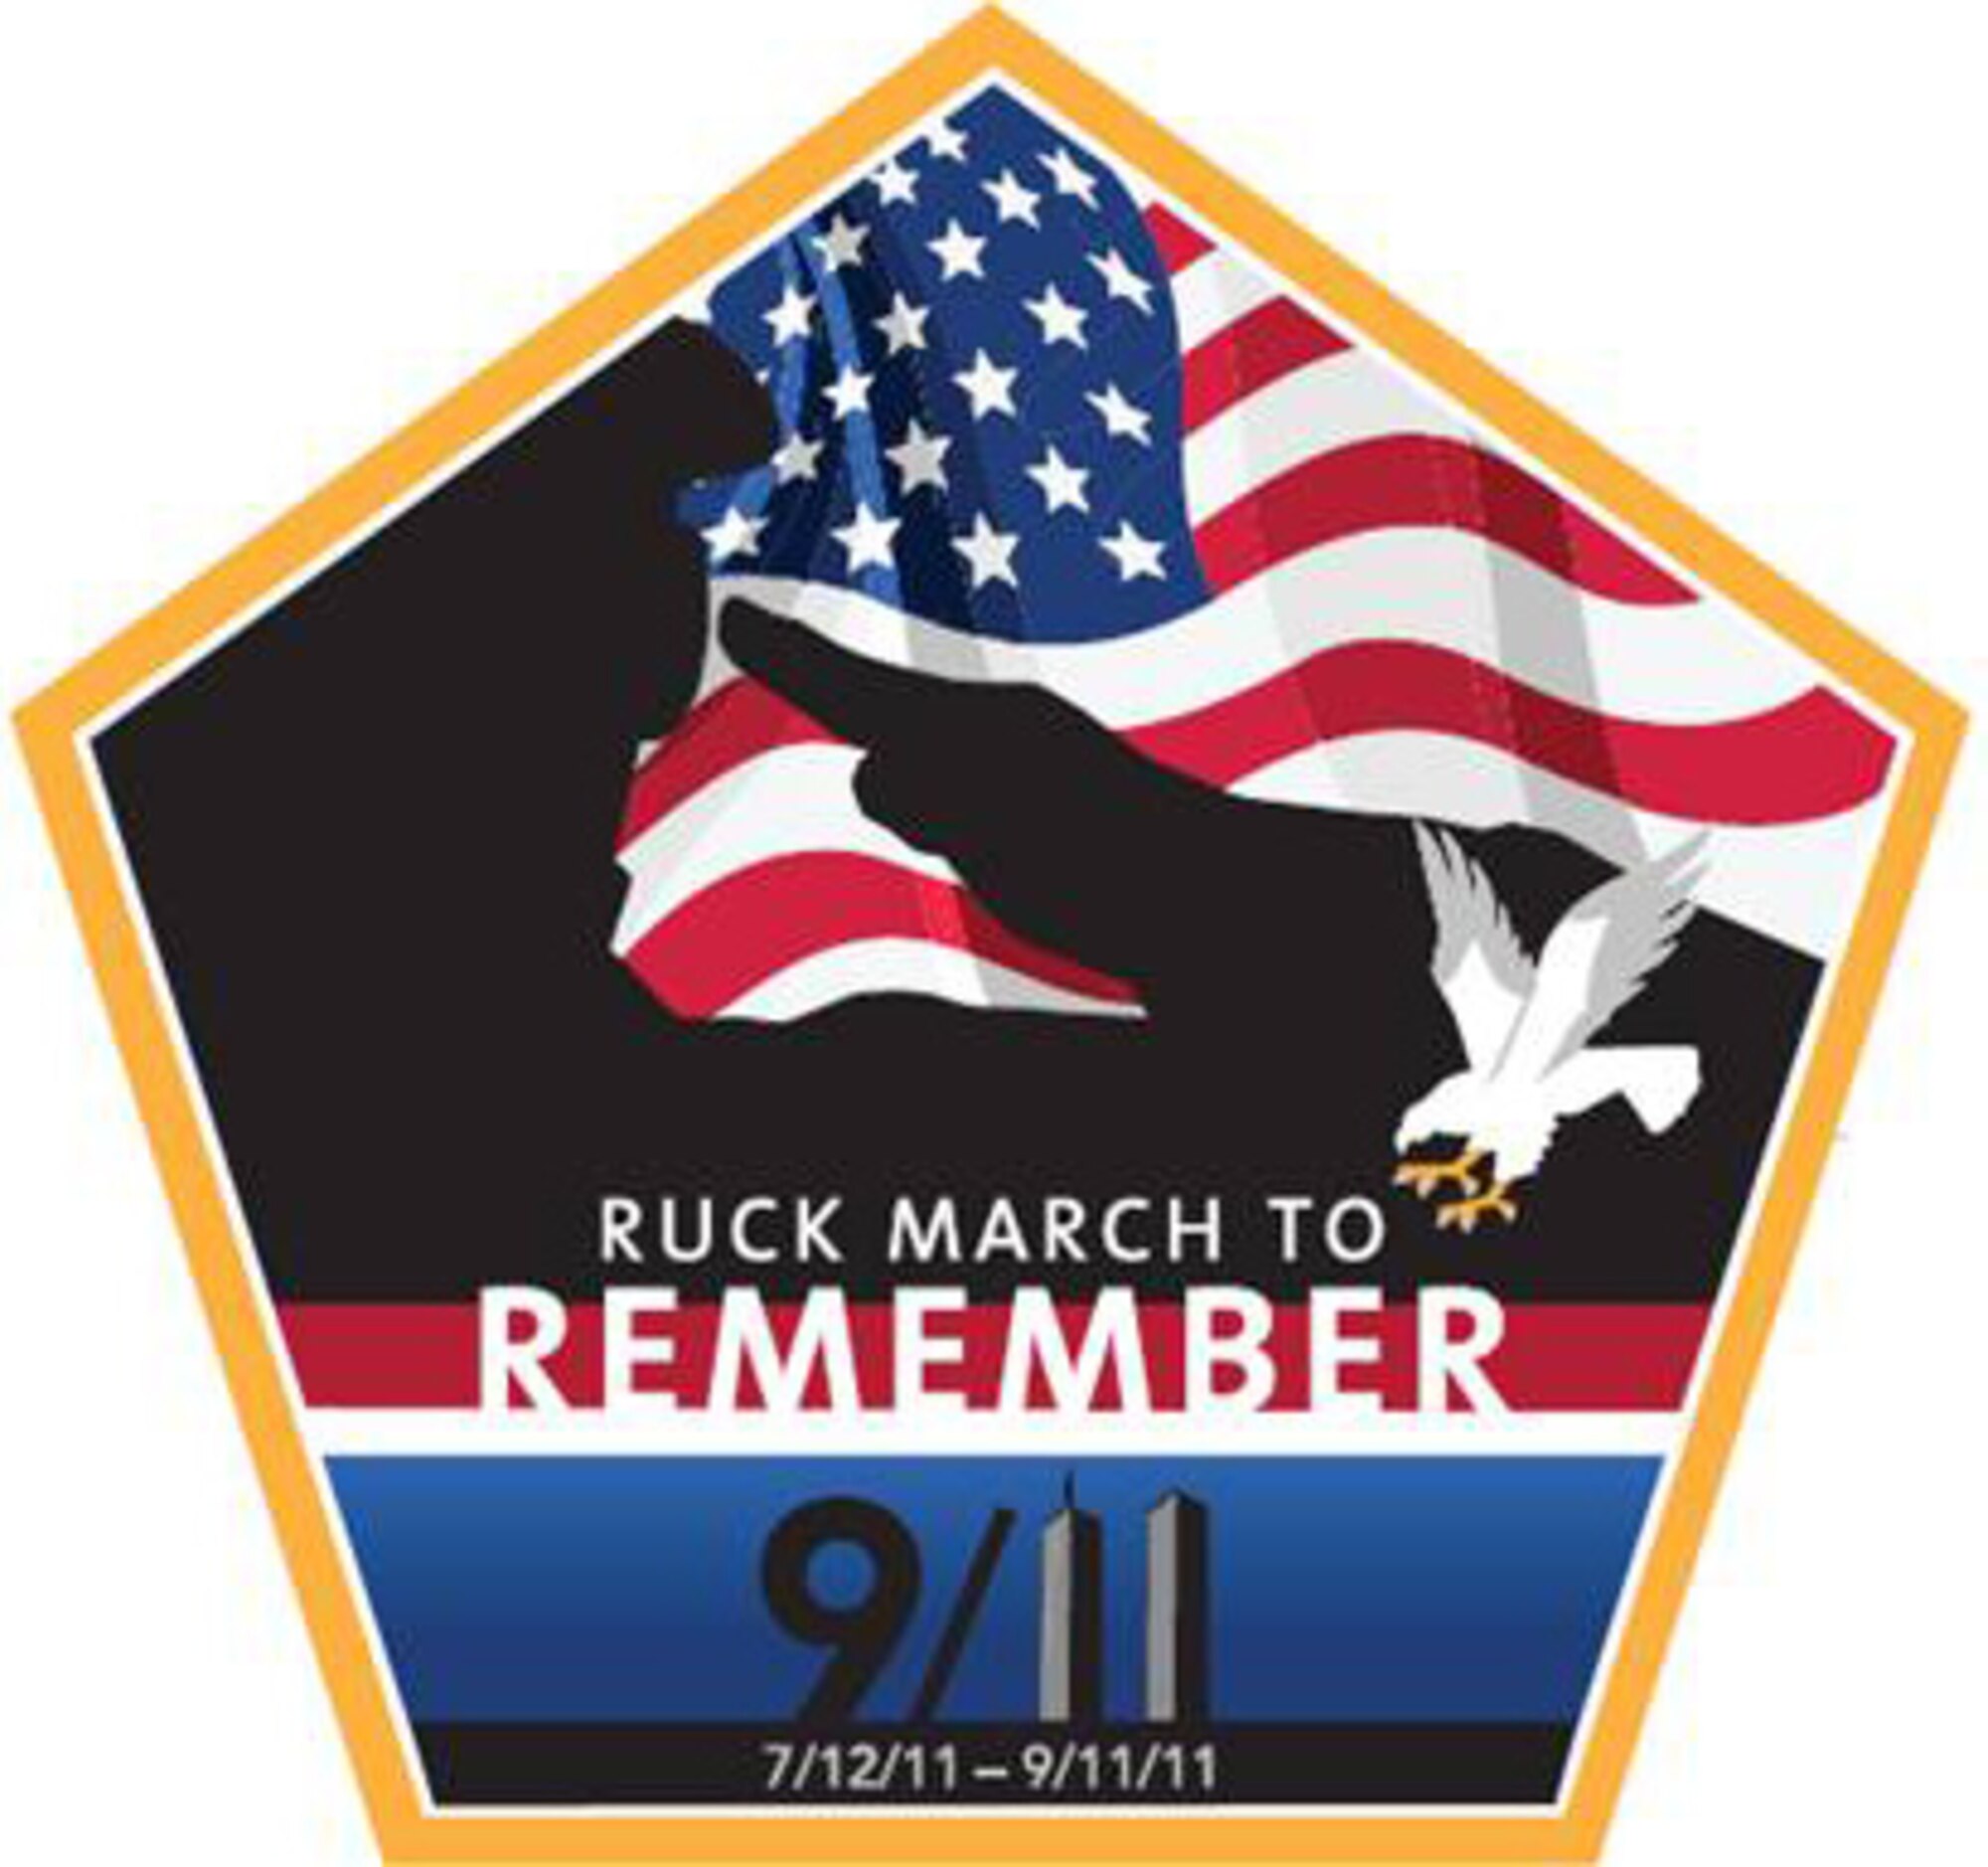 Who: 440 SFS (Only Reserve Unit) 
What:  USAF Security Forces is conducting a “Ruck March to Remember” from HQ Security Forces Center, LAFB TX to Ground Zero in NY 
When: 12:00 p.m. August 17 - 12:00 p.m., August 21, (56 day light hrs)
Where: 440th SFS has the 148 mile leg starting at Elgin, S.C. to Greensboro, N.C.  
Why: Remembrance of Attack and SF Airmen who have lost their lives in the War on Terror
How: Only With Your Help!
Please have all volunteers contact                                                                       
 MSgt Broughman 910-394-1034  